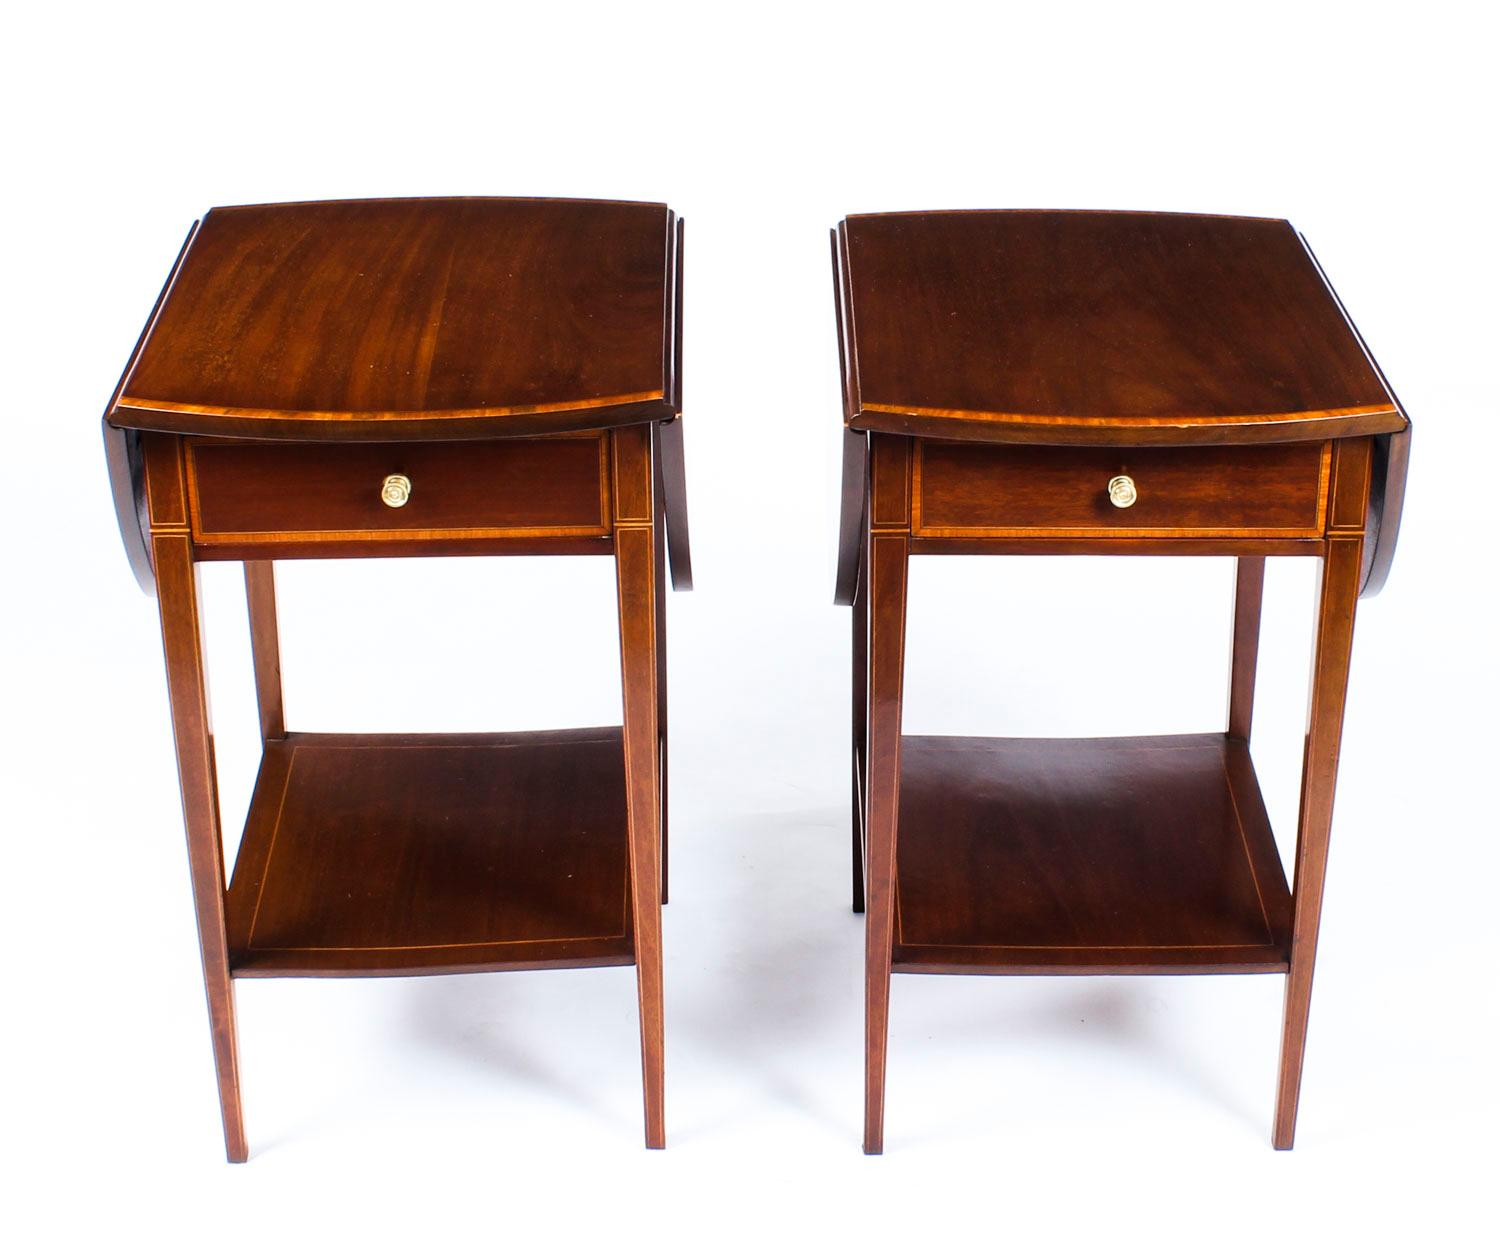 A pair of antique Edwardian mahogany inlaid bedside tables, of Pembroke form, circa 1900 in date.

Each with an oval hinged top above a frieze drawer and raised on square tapering legs united by undertiers.

Each with wonderful satinwood